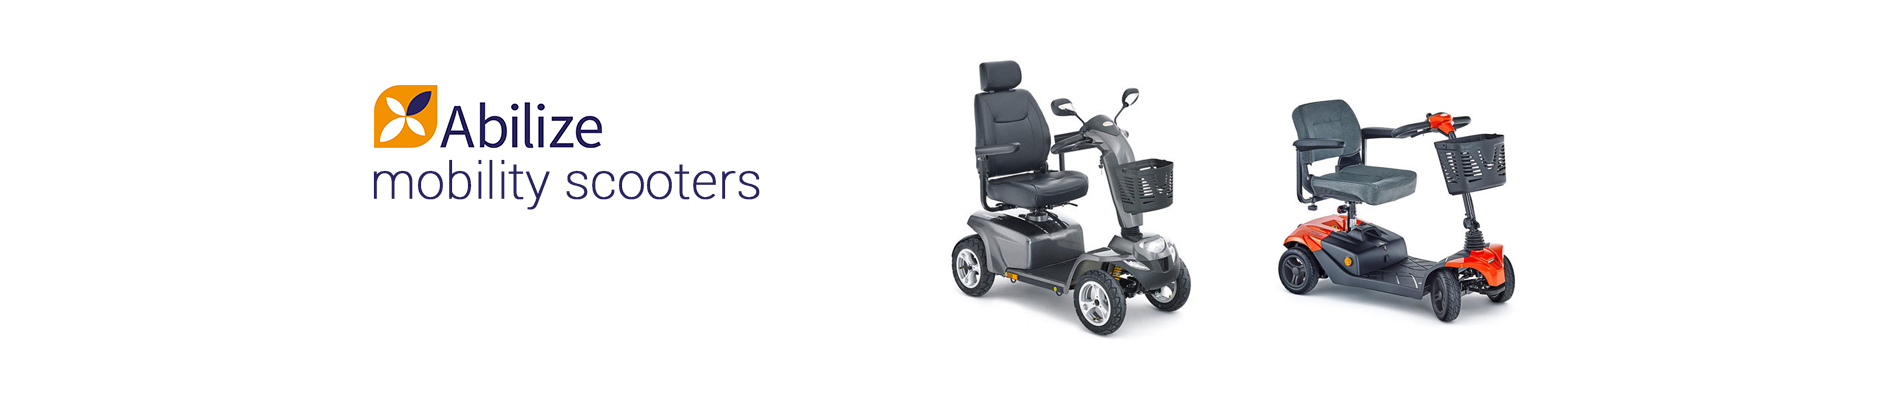 Abilize mobility products